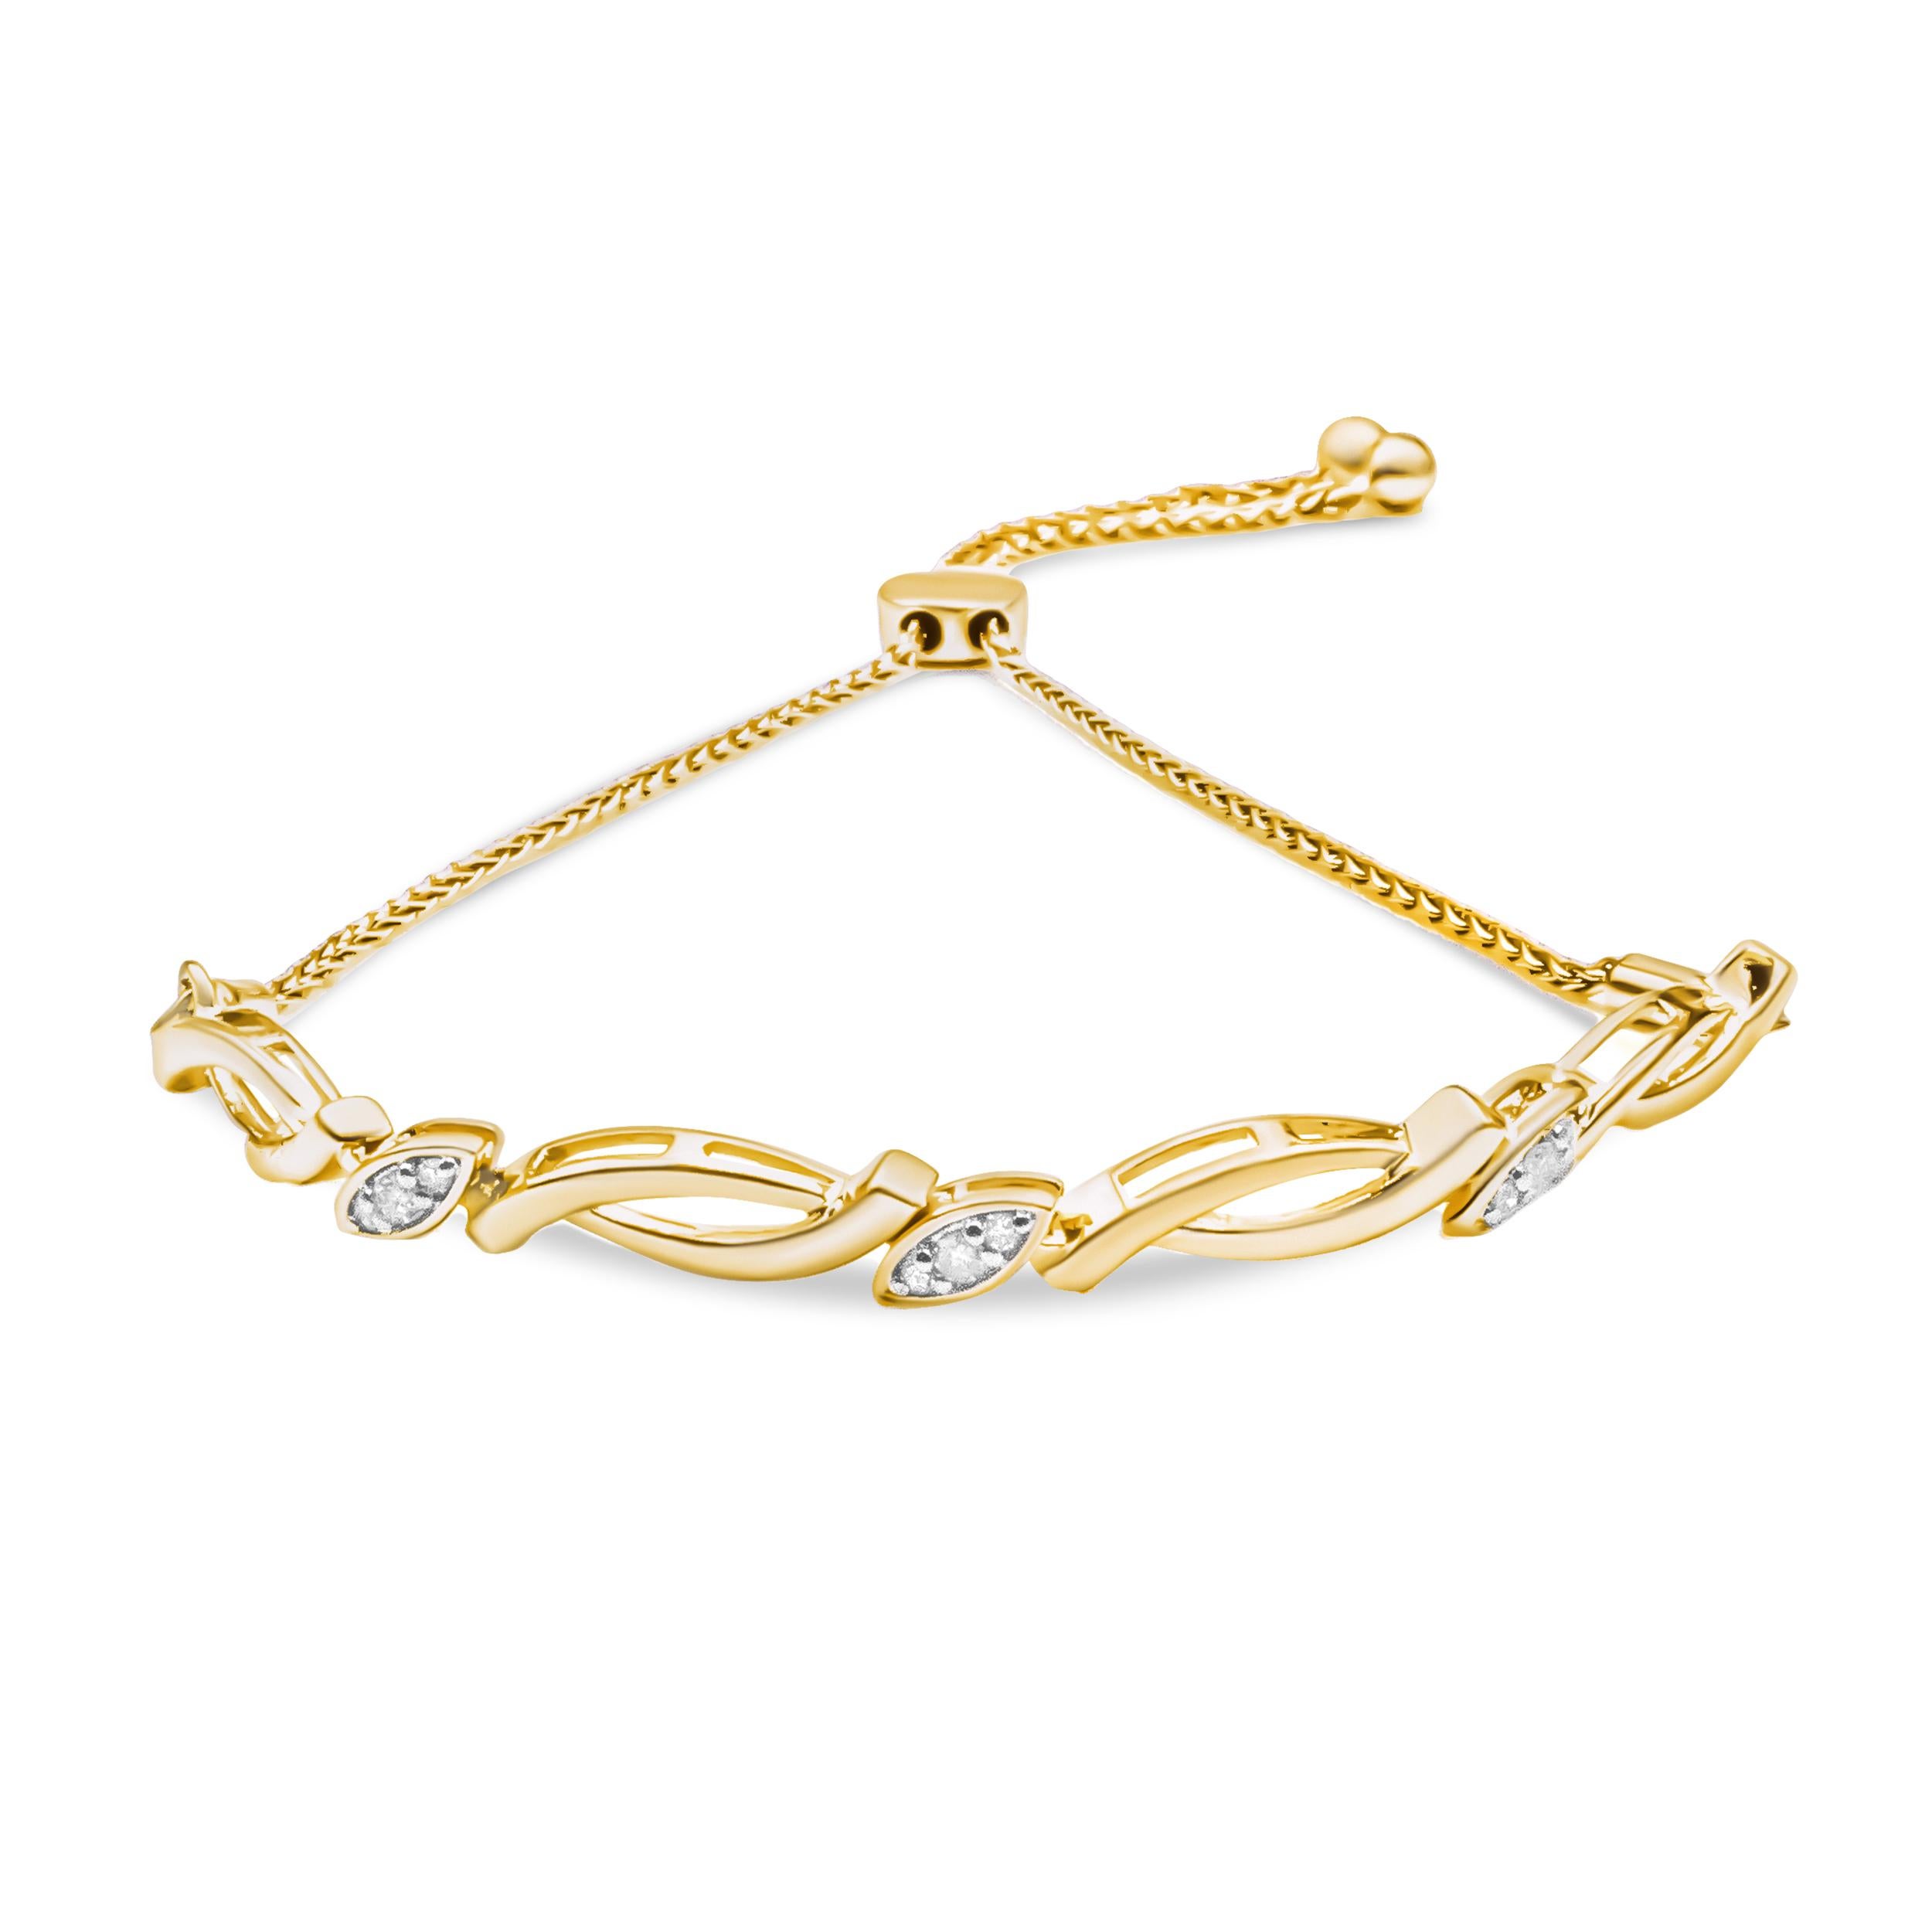 Trendy yet everlasting, this diamond accent bolo bracelet has a beautiful alternating design of infinity links and natural round-cut diamonds. The bracelet is crafted in genuine .925 sterling silver and plated with luxurious 14k yellow gold. The